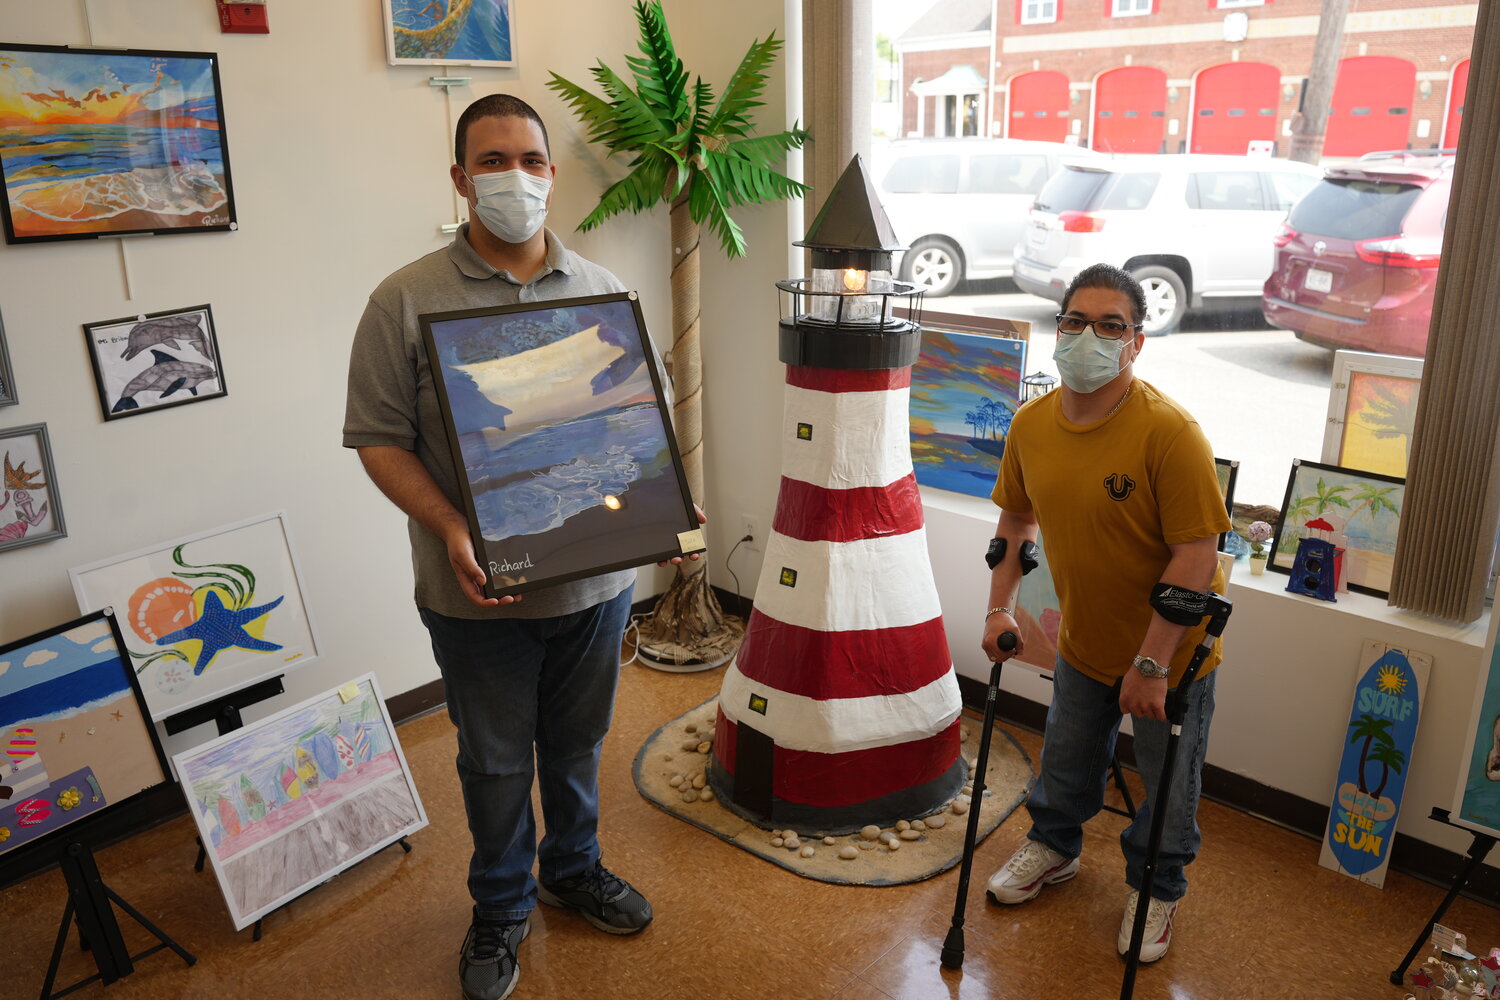 The AHRC Nassau East Meadow Art Gallery’s newest exhibit is titled ‘A Day at the Beach.’ Davis Hernandez, right, helped make the 5-foot-tall papier-maché work of art, and Richard Infante painted beach scenes.